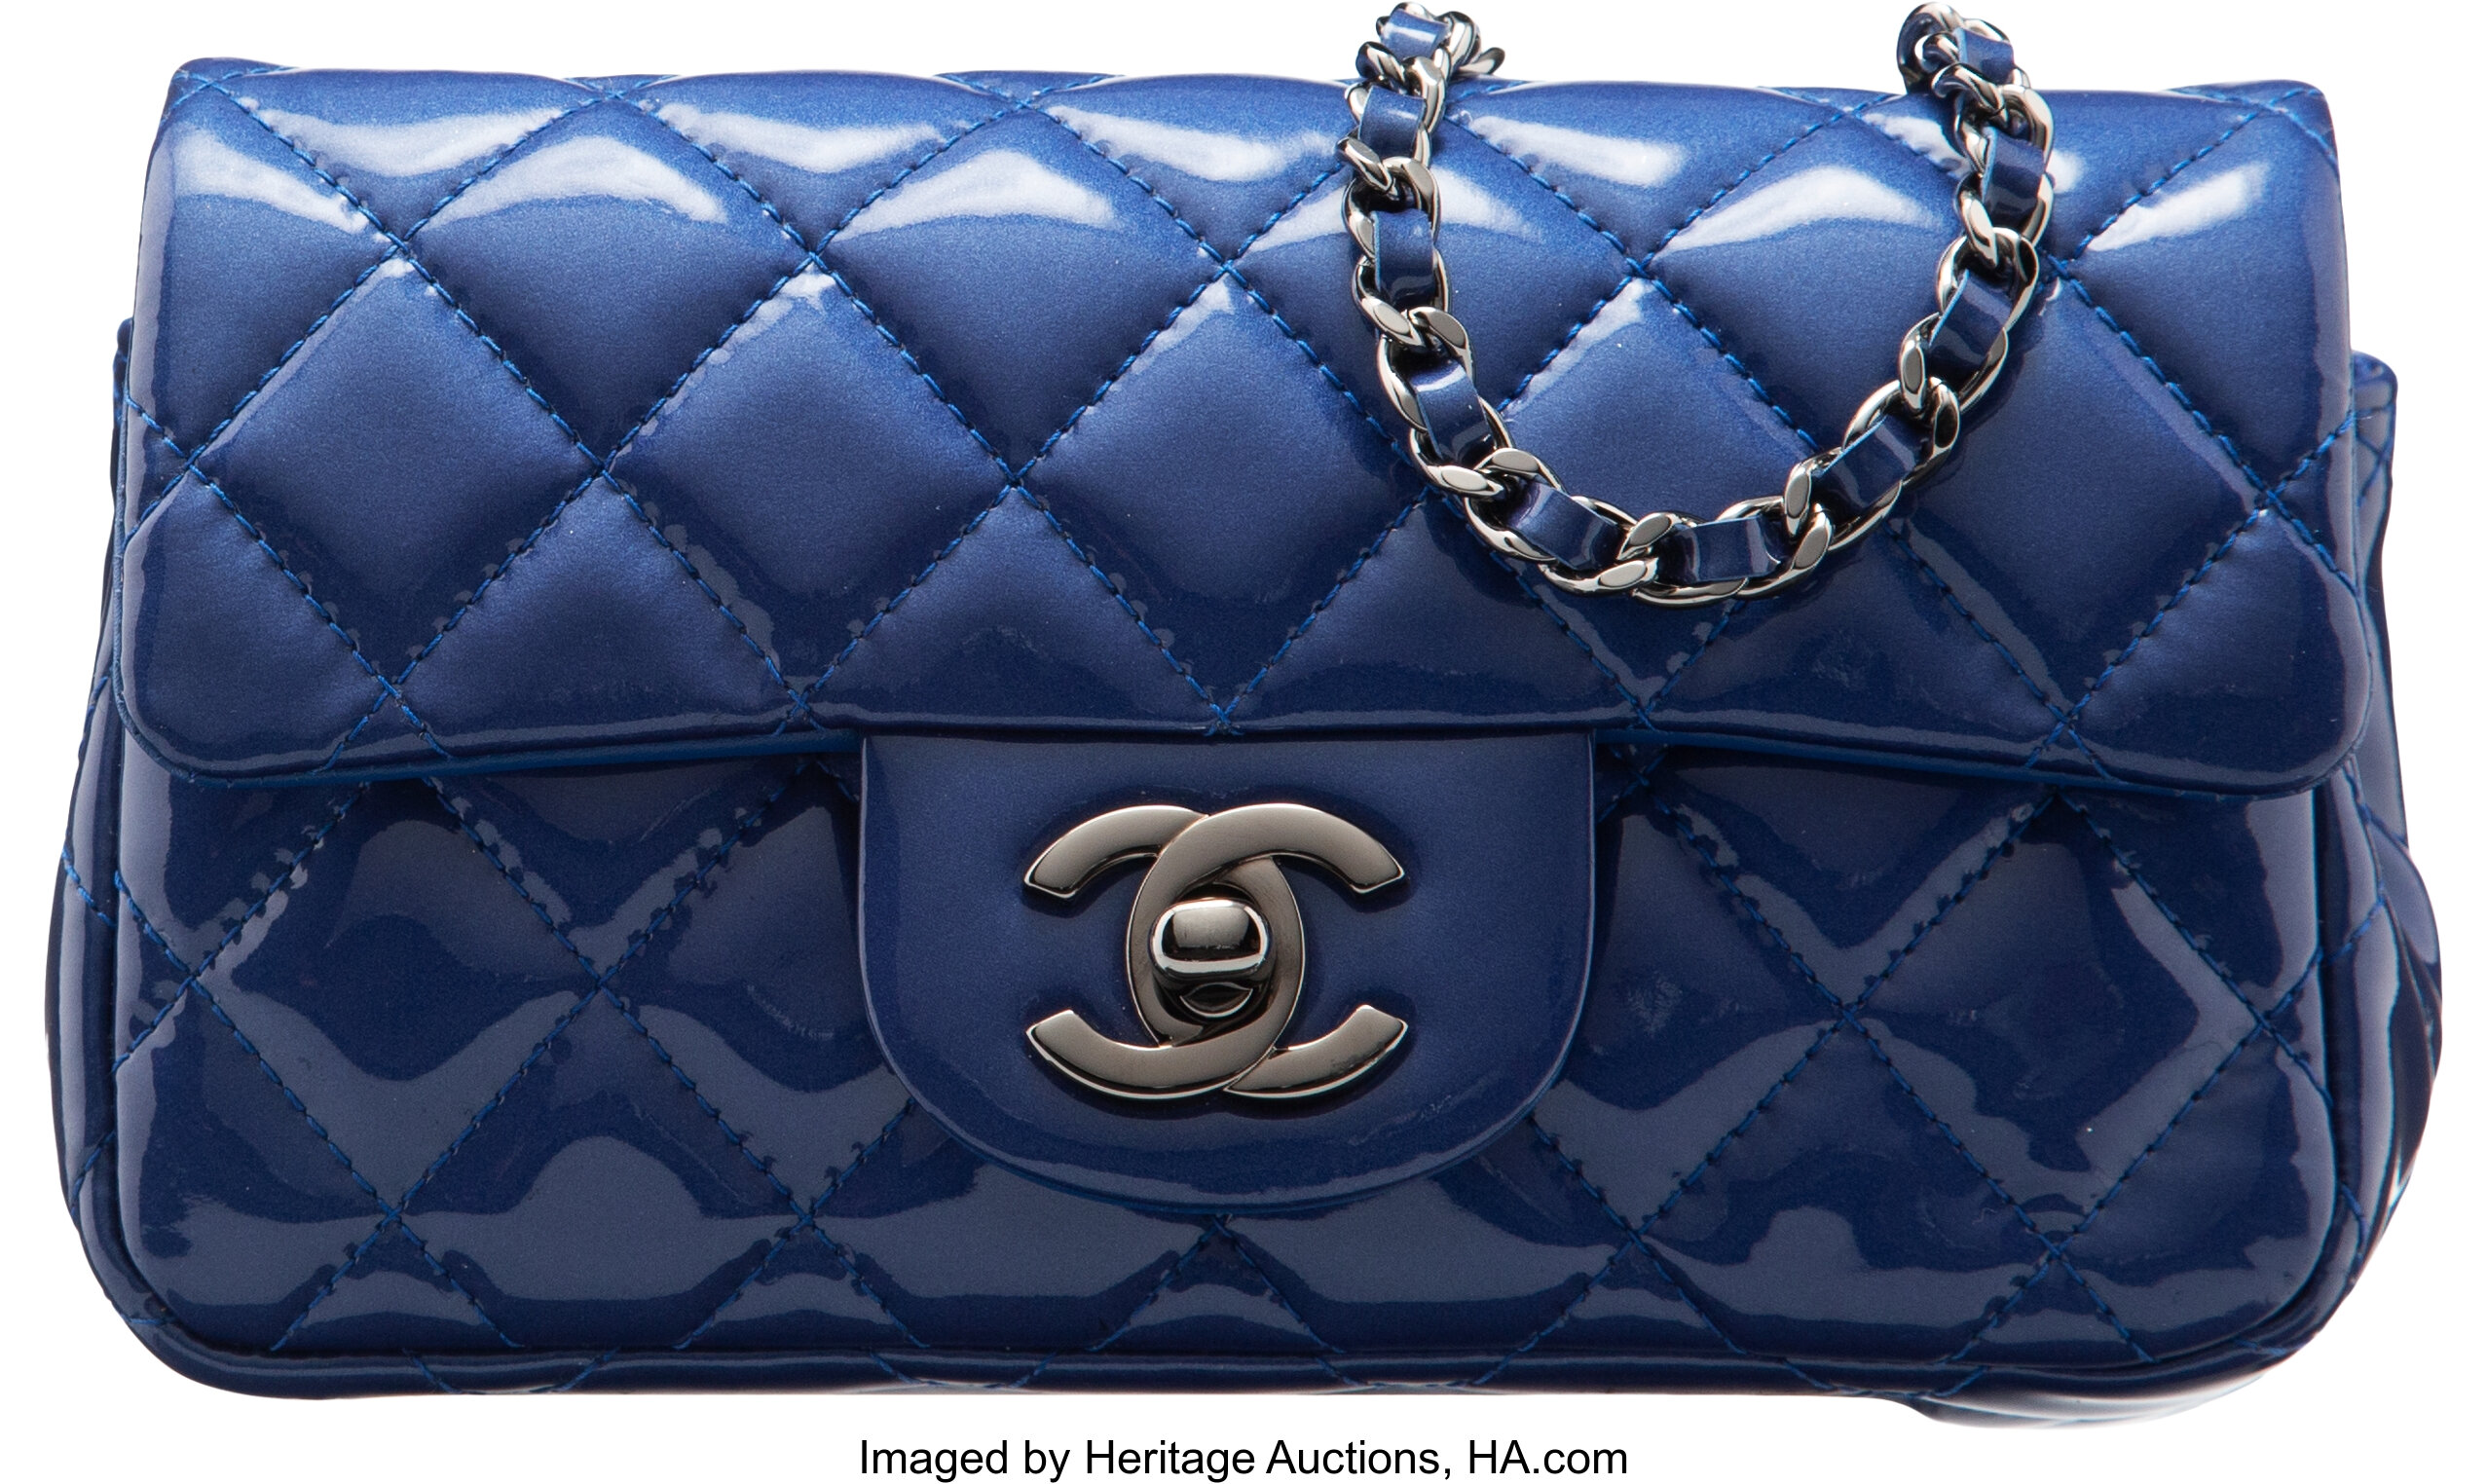 Chanel 22 leather mini bag Chanel Blue in Leather - 35014126